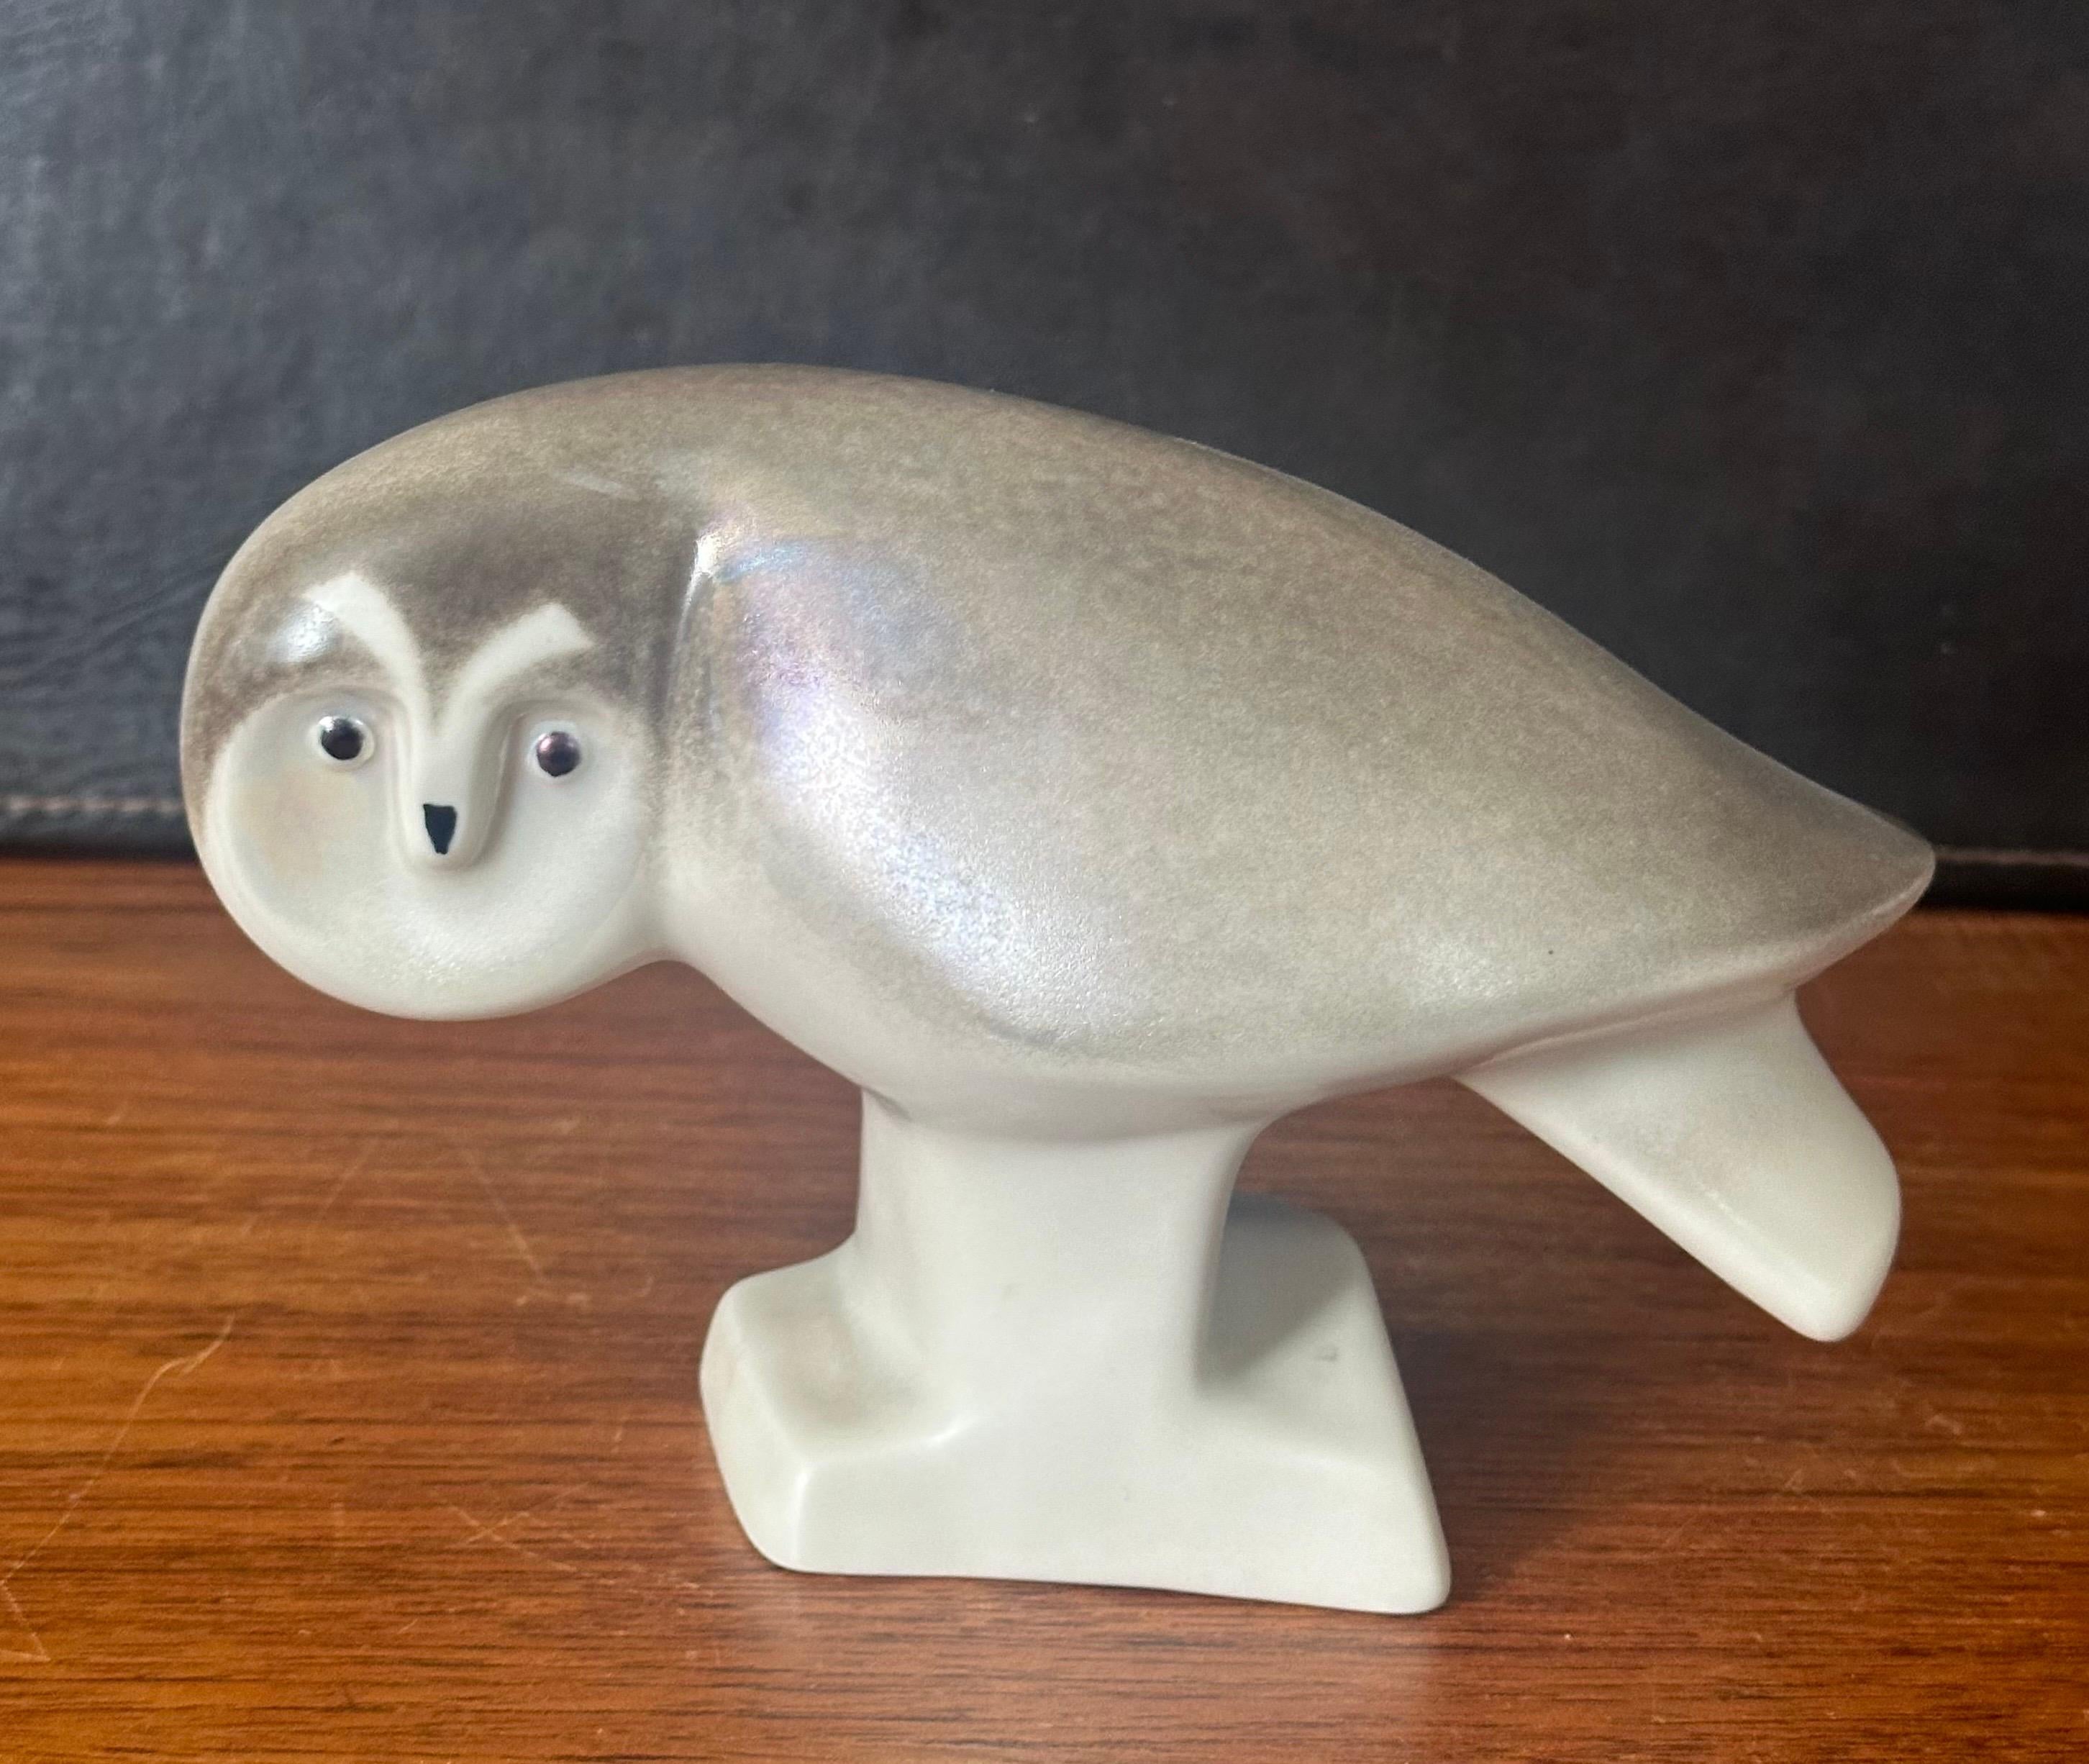 A hard to find porcelain owl sculpture by Lillemor Mannerheim for Arabia of Finland, circa 1980s.  Signed on the underside by the artist, the piece was produced as a limited special edition series for the World Wildlife Foundation (Panda mark).  The